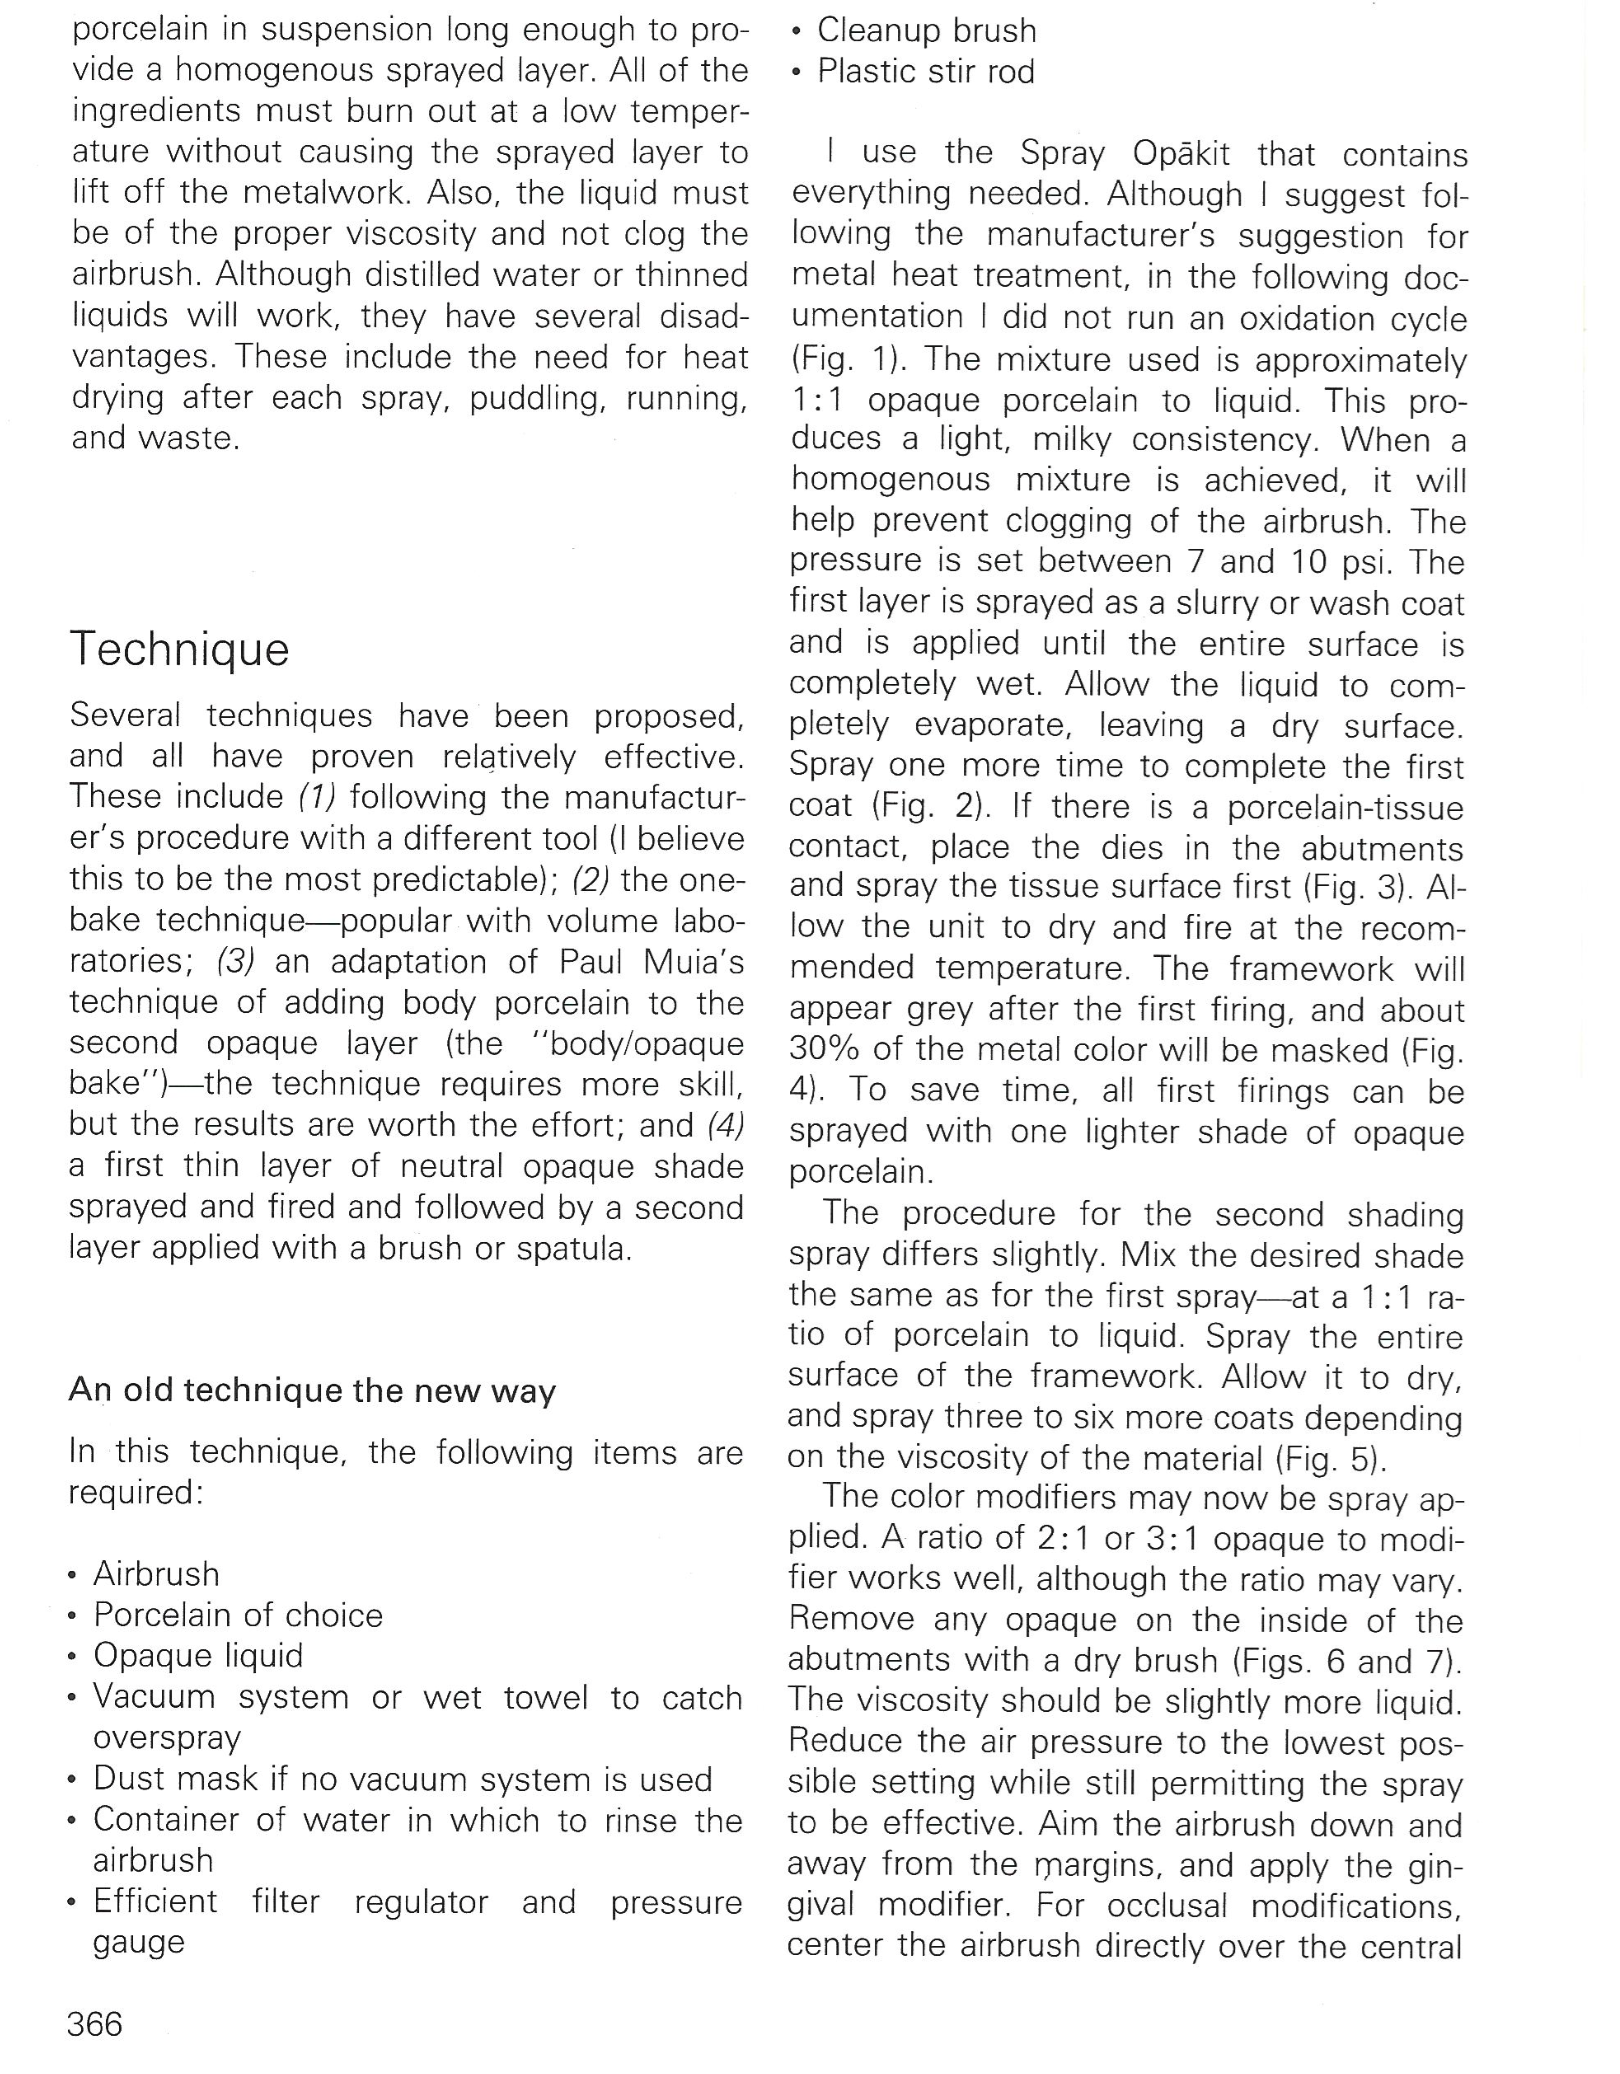 articles_pg2